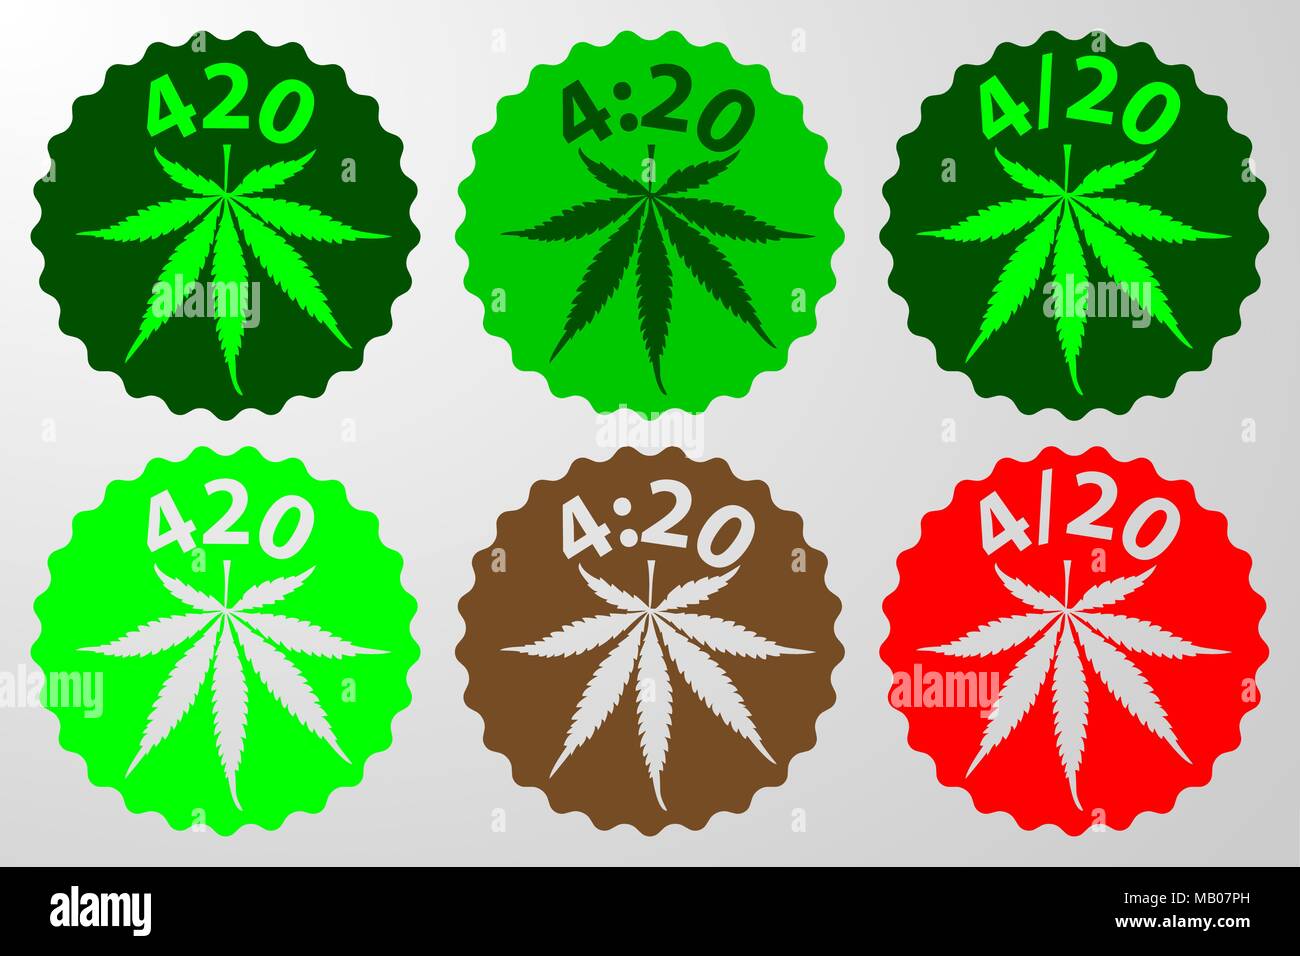 420 Cannabis Days Detailed Cannabis Day Stock Vector (Royalty Free